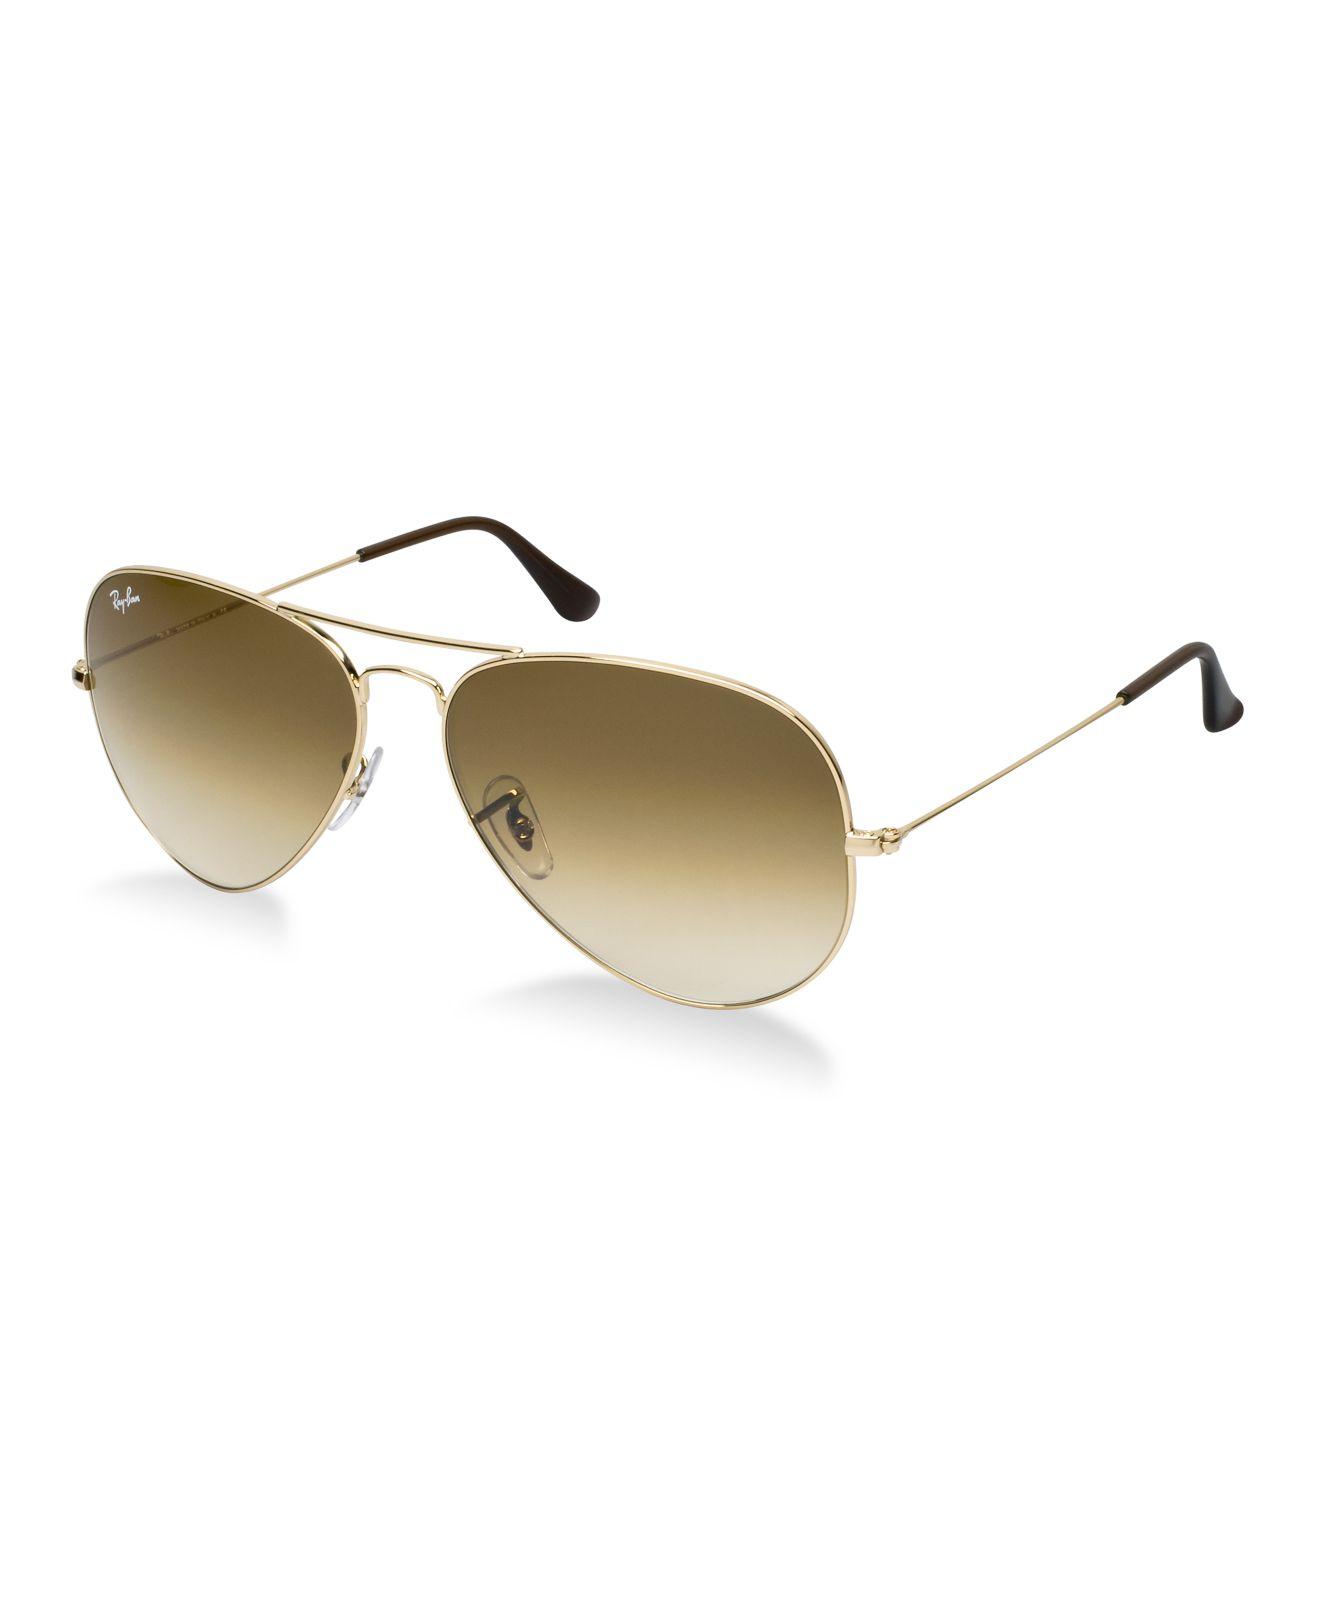 Ray Ban Sunglasses Rb3025 Aviator Gradient In Gold Light Brown Metallic For Men Save 2 Lyst